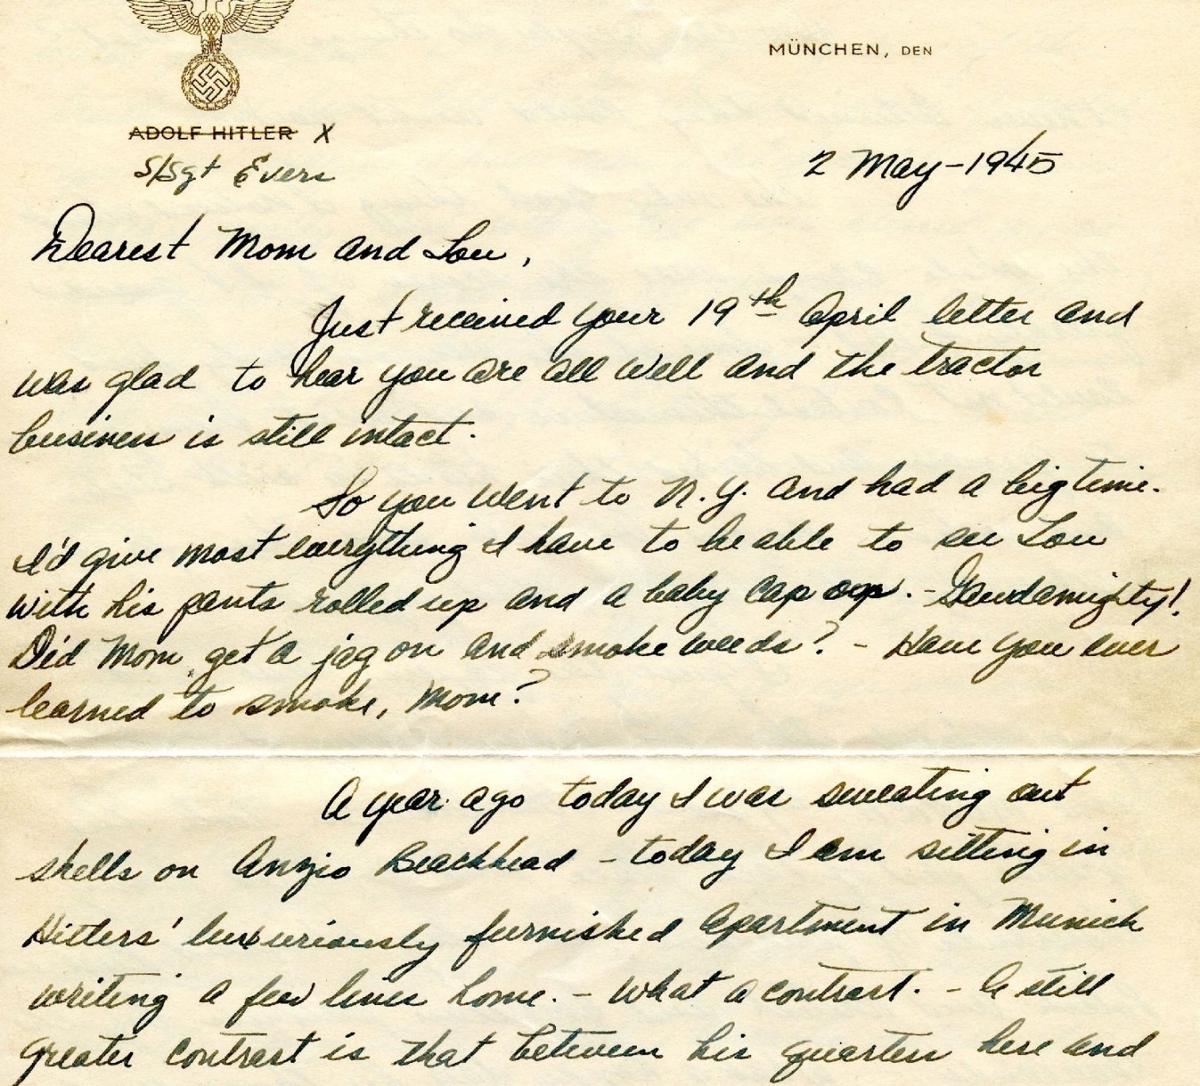 Historians Million Letters Campaign Collecting War Letters Between Troops And Their